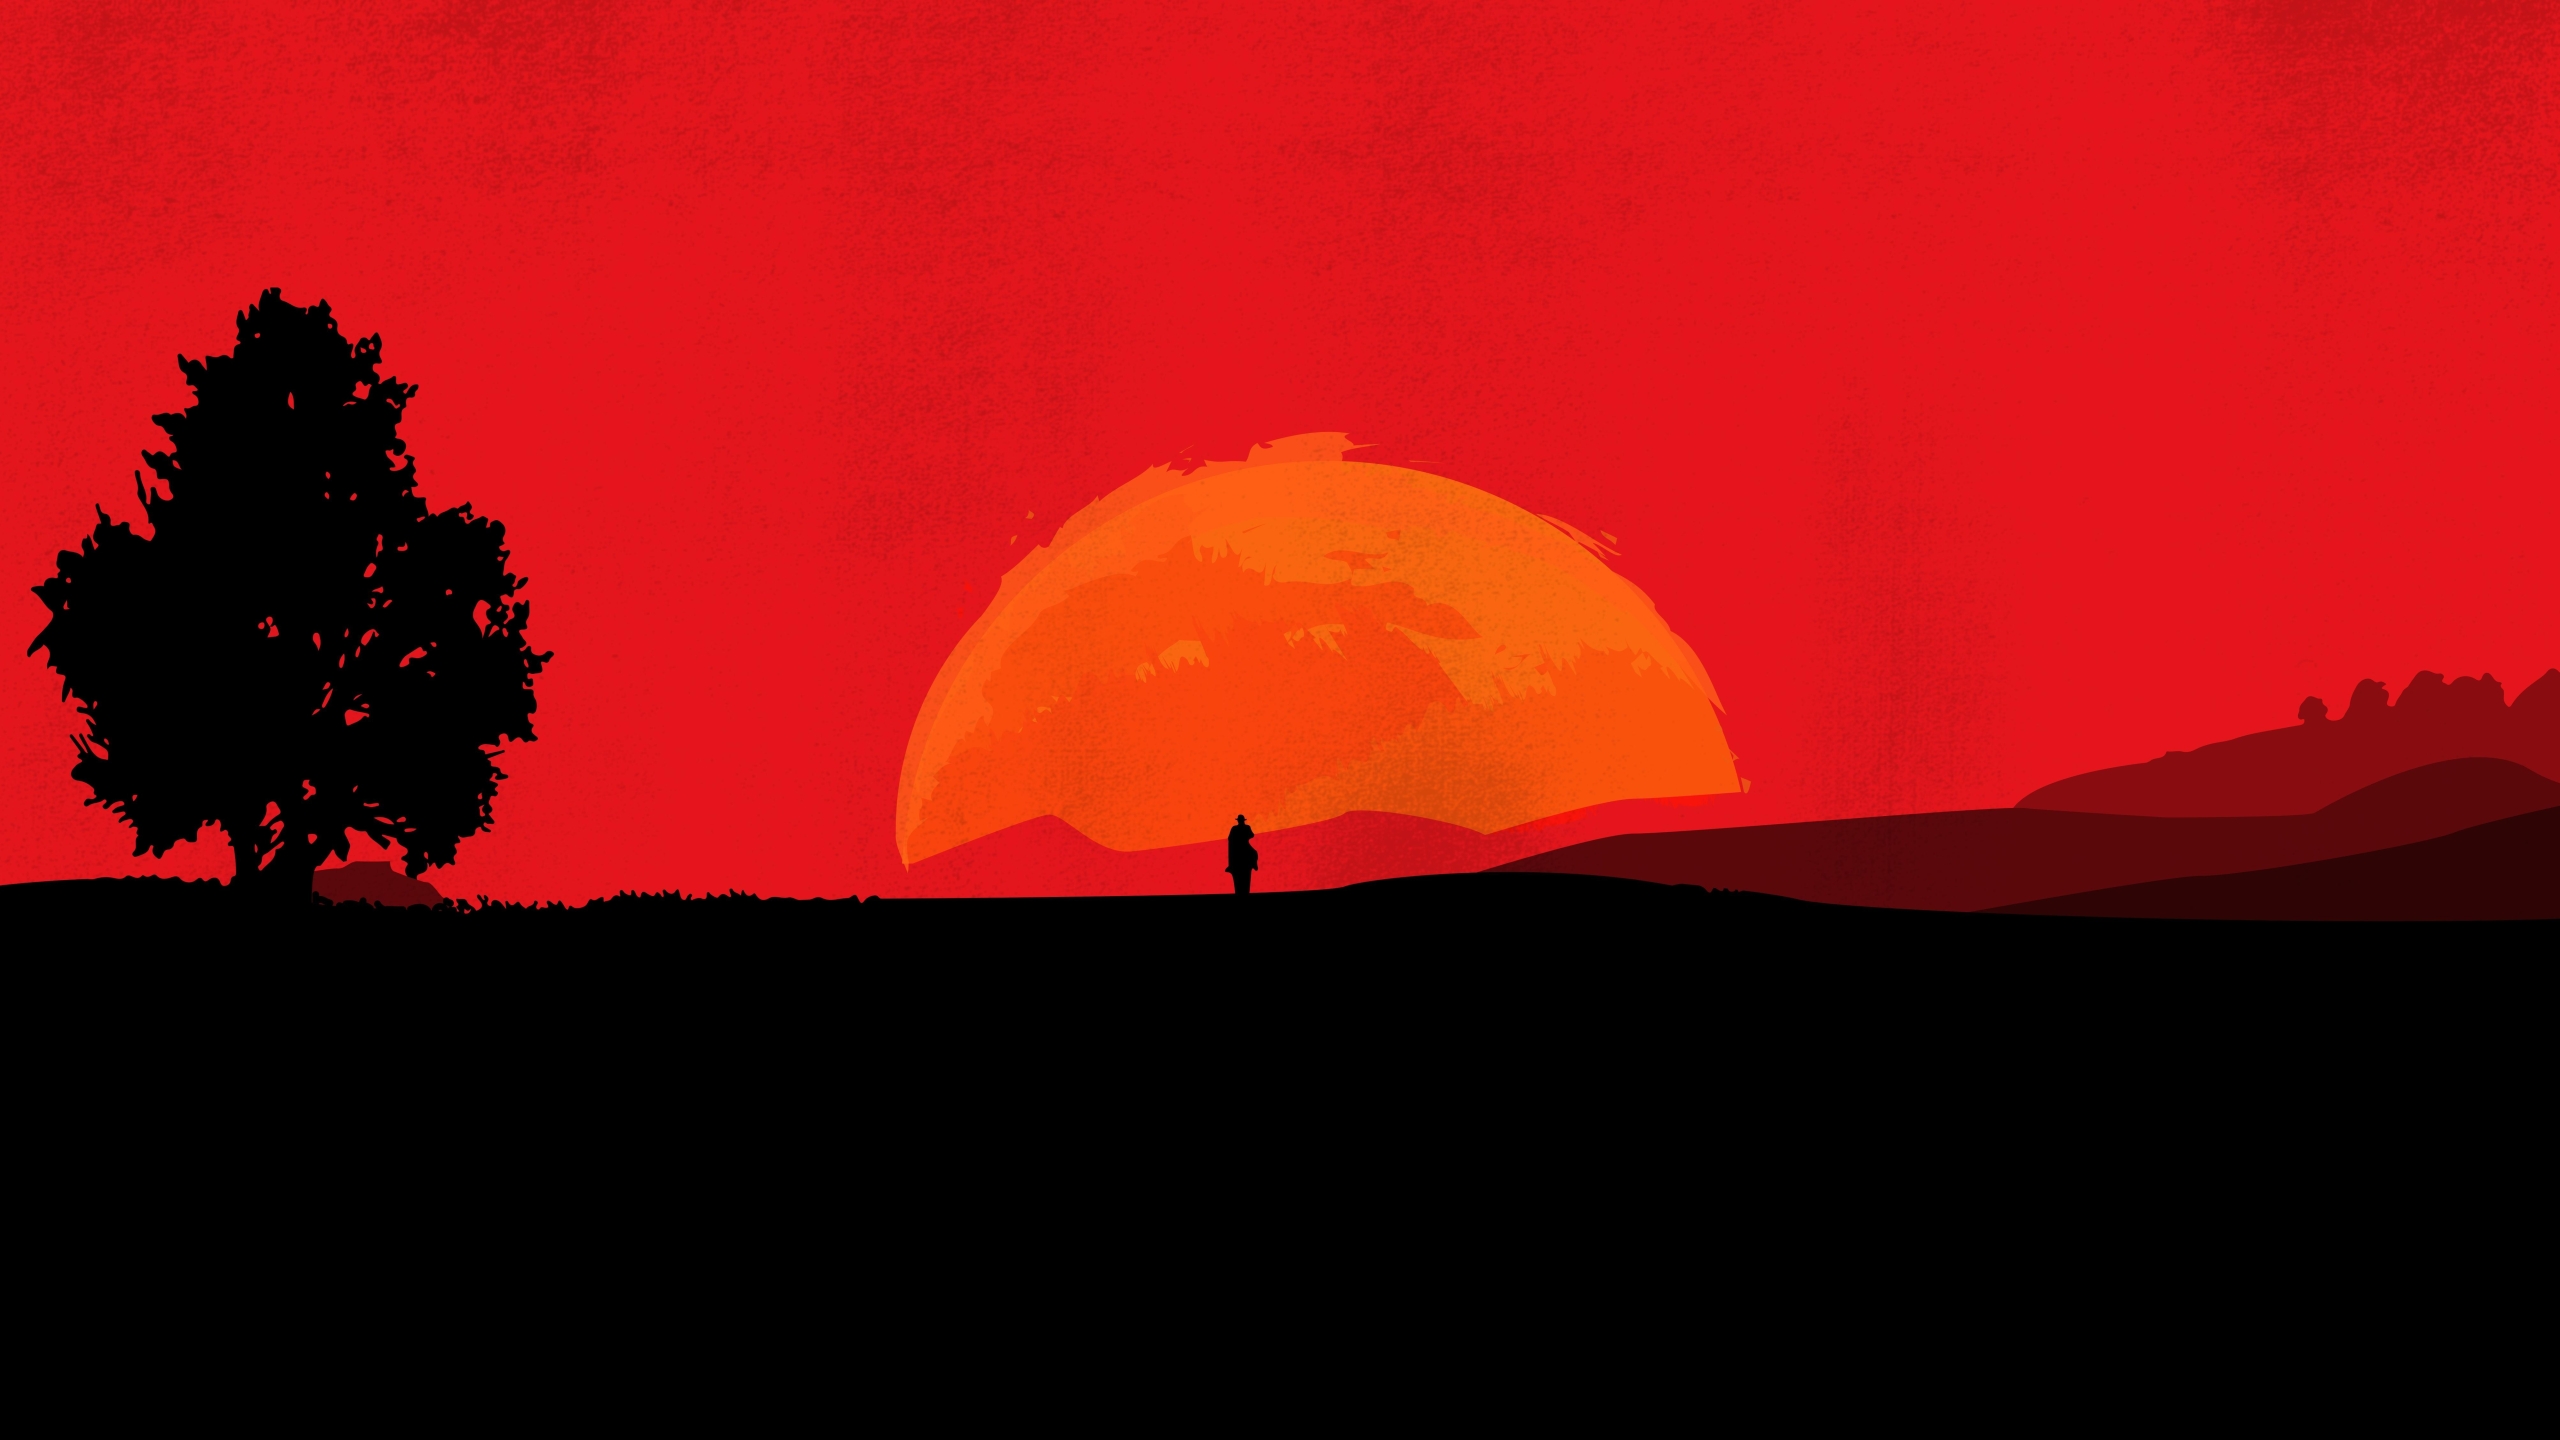 Android red dead redemption 2 backgrounds - gulfler